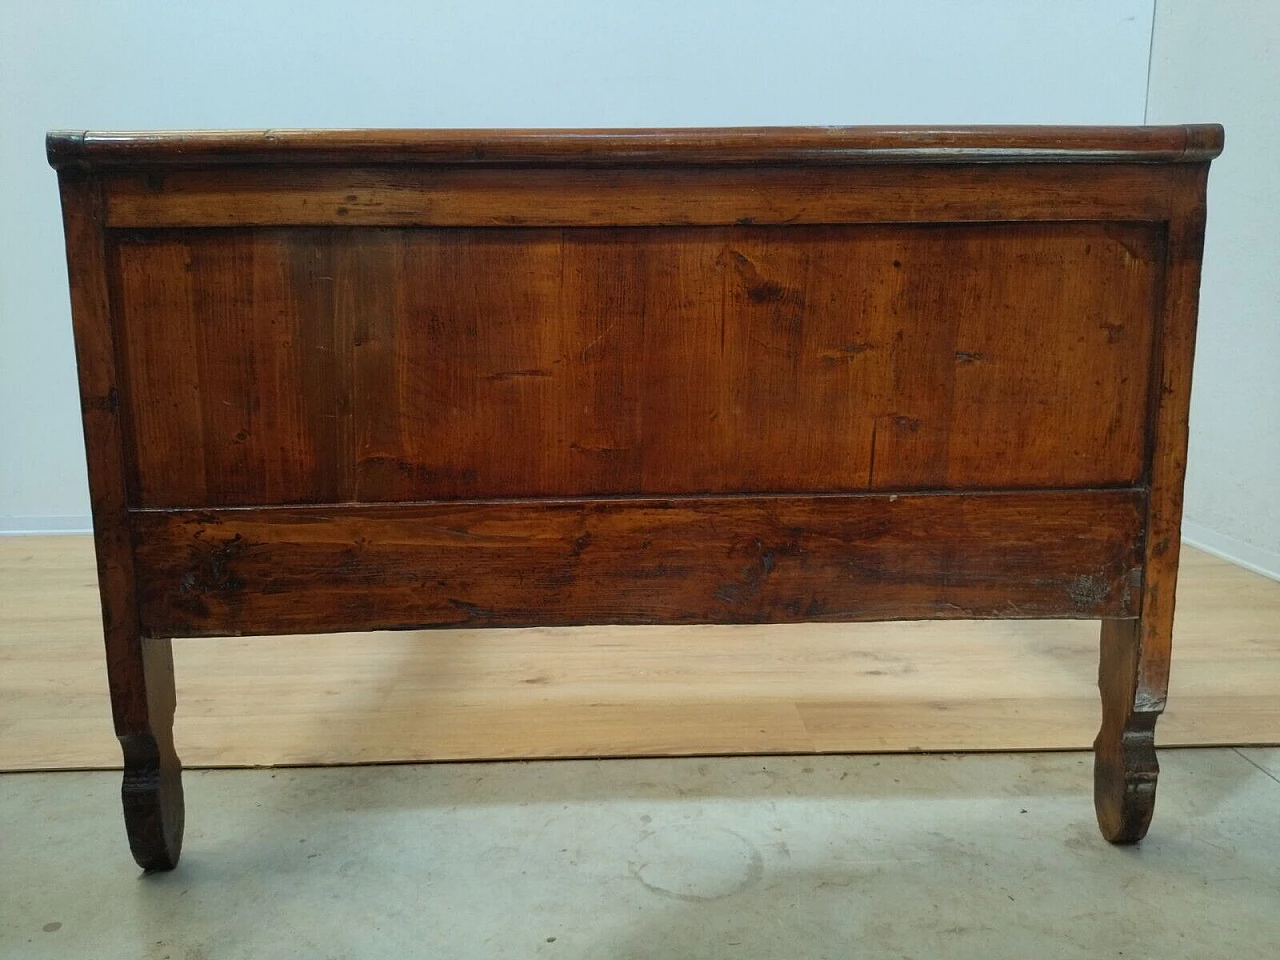 Louis Philippe walnut-stained solid spruce bed, mid-19th century 18